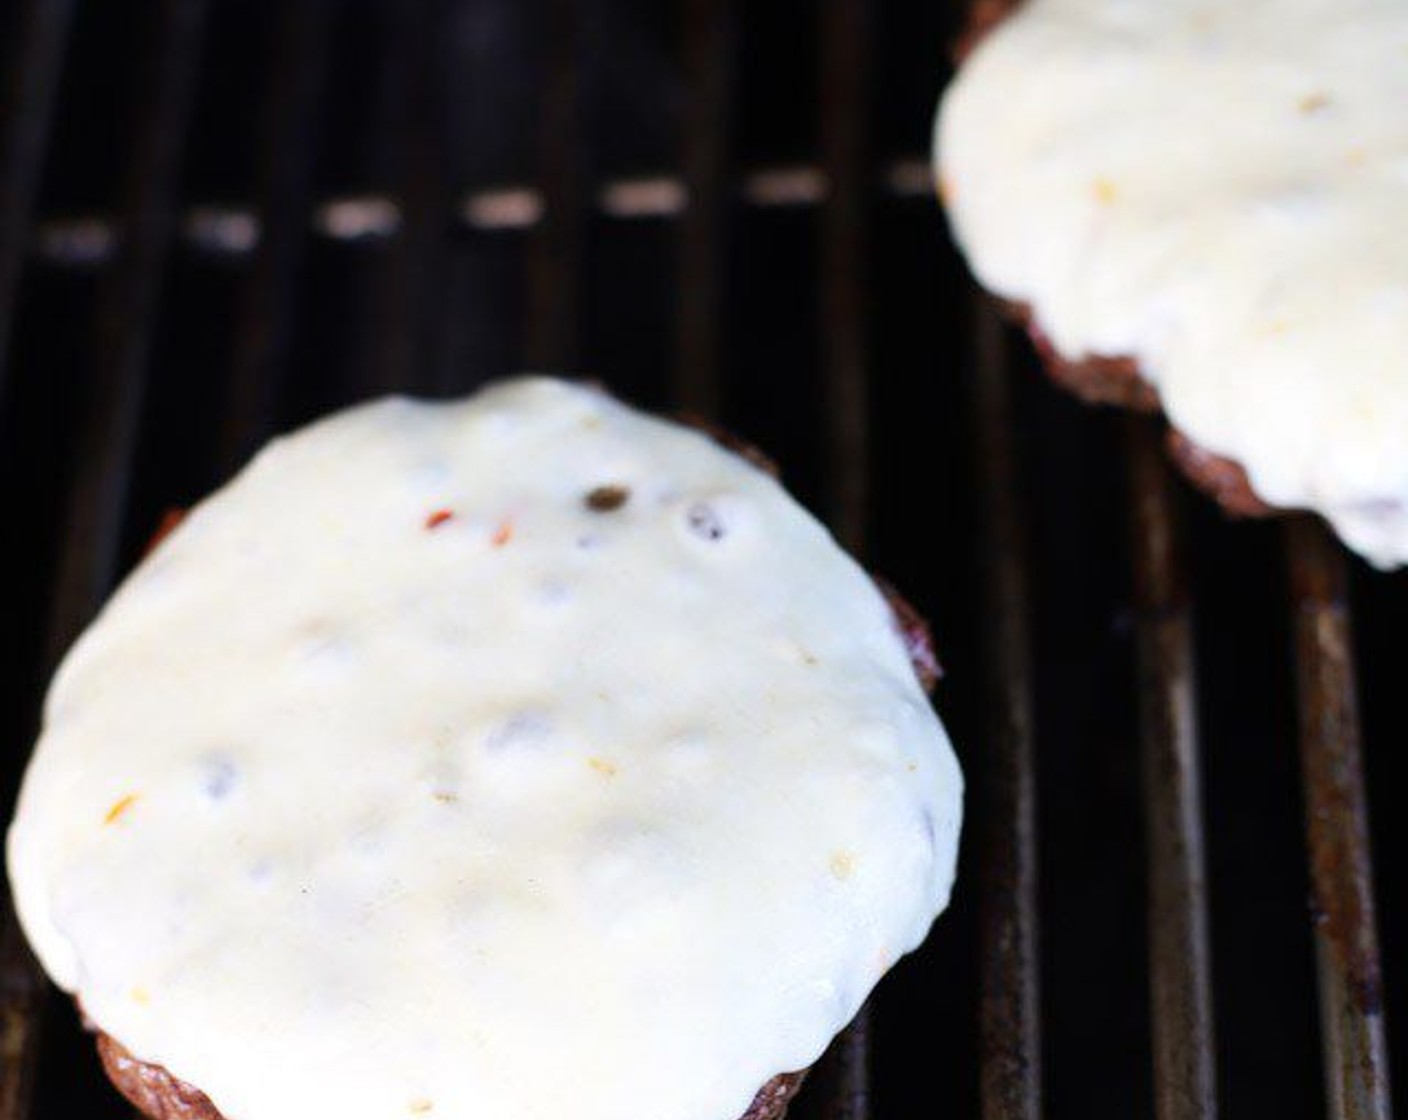 step 7 When the burgers are just about done to your liking, add a slice of Pepper Jack Cheese (4 slices) to each patty. Close the lid on your grill and grill for another 1-2 minutes to melt the cheese slightly.